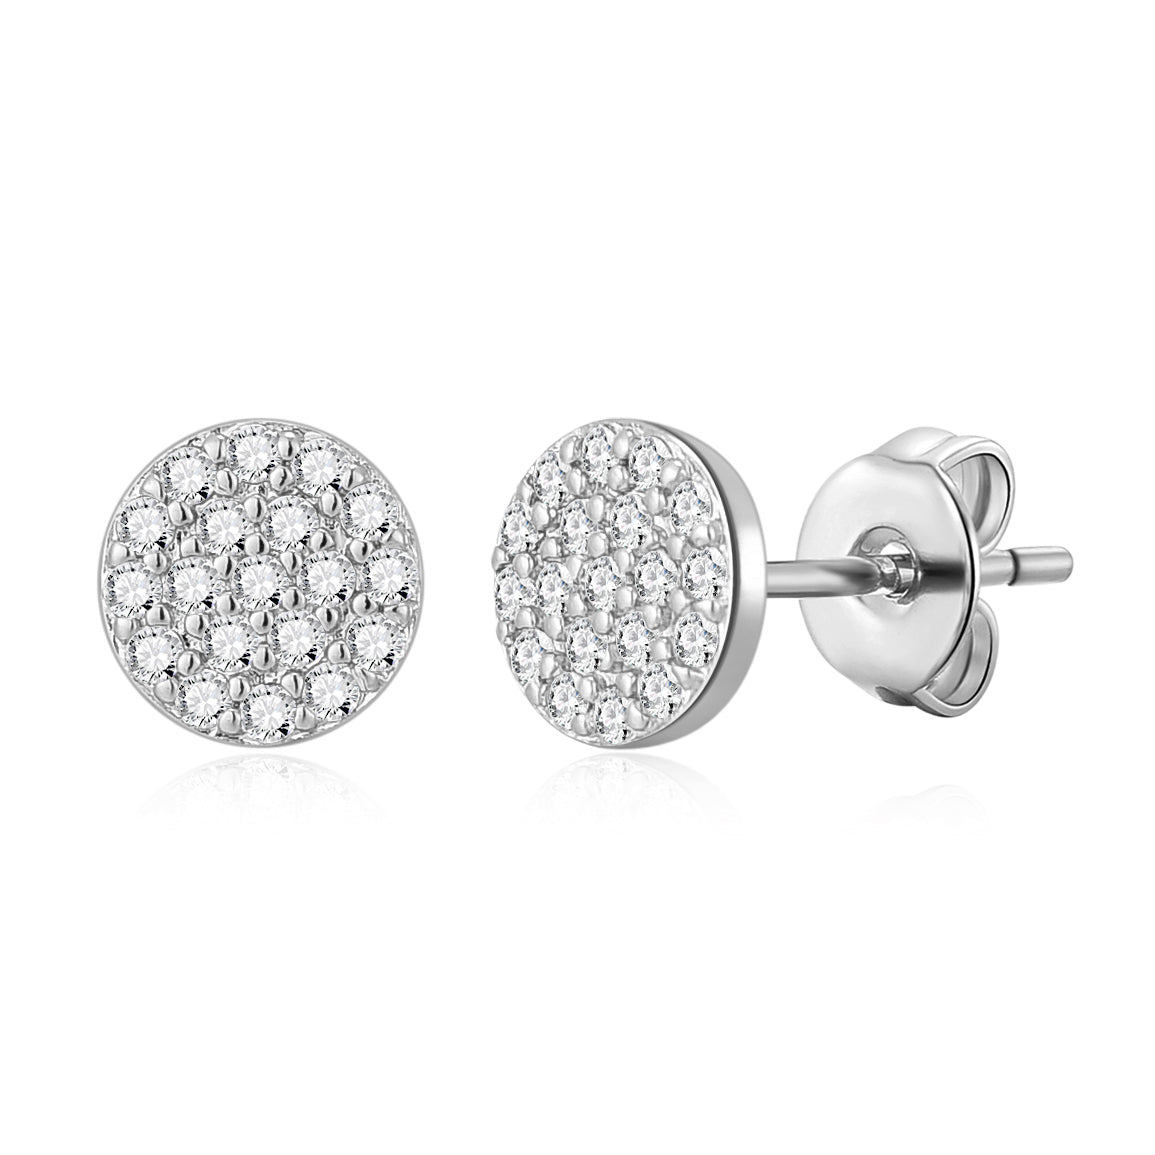 Silver Plated Pave Round Earrings Created with Zircondia® Crystals by Philip Jones Jewellery